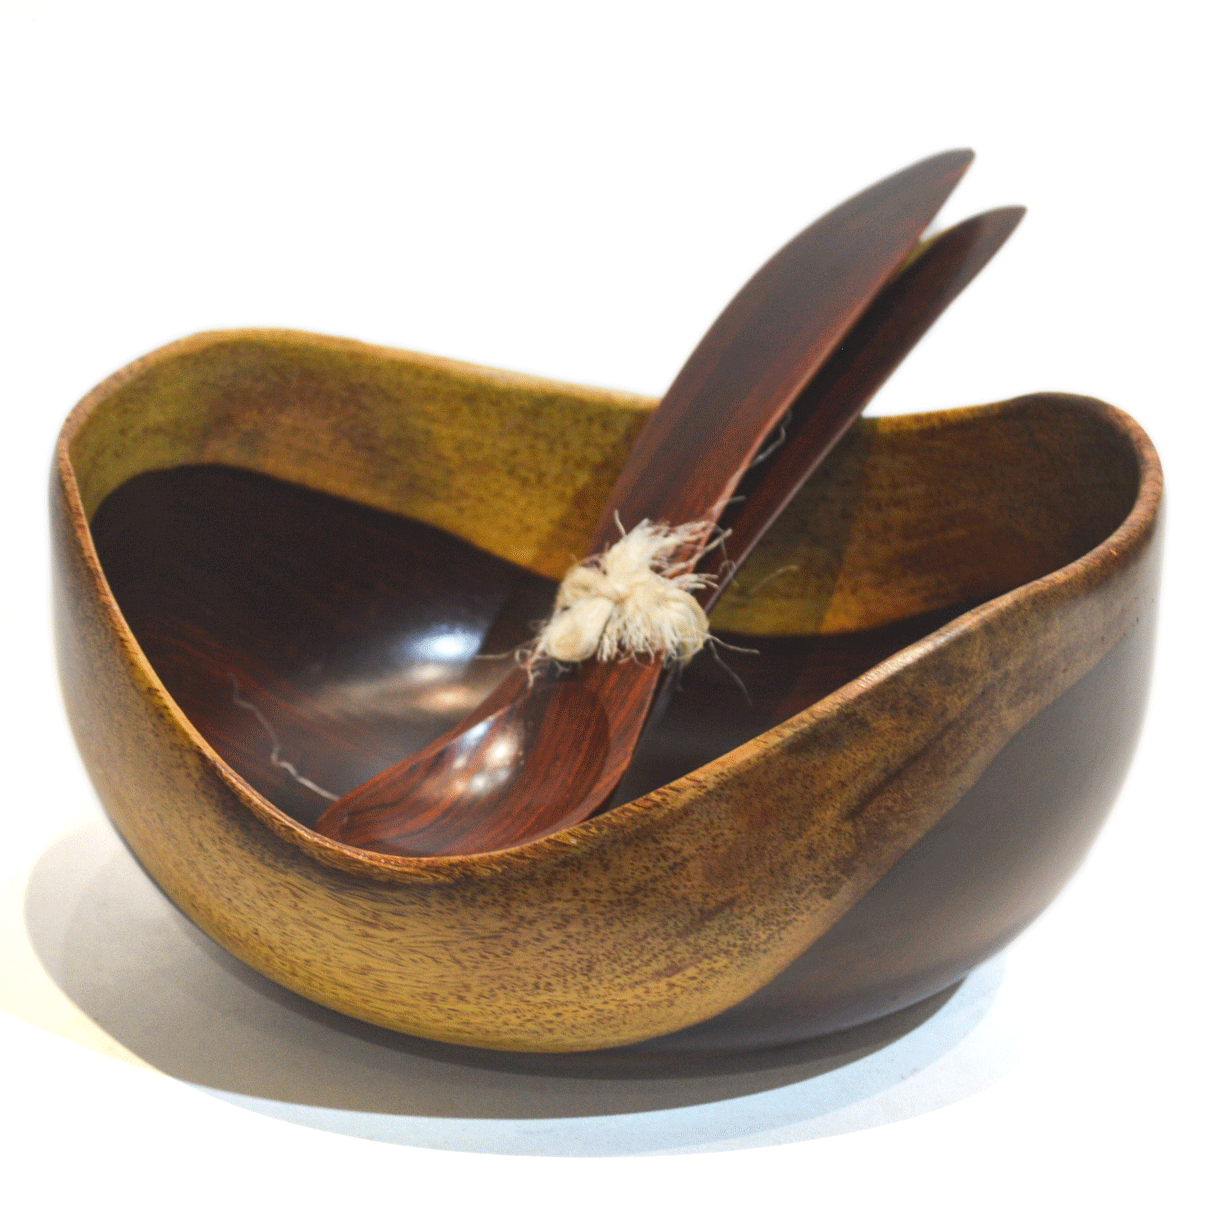 www.costaricacongo.com www.costaricagiftshops.com gift souvenir handmade Wooden salad bowl with spoon and fork